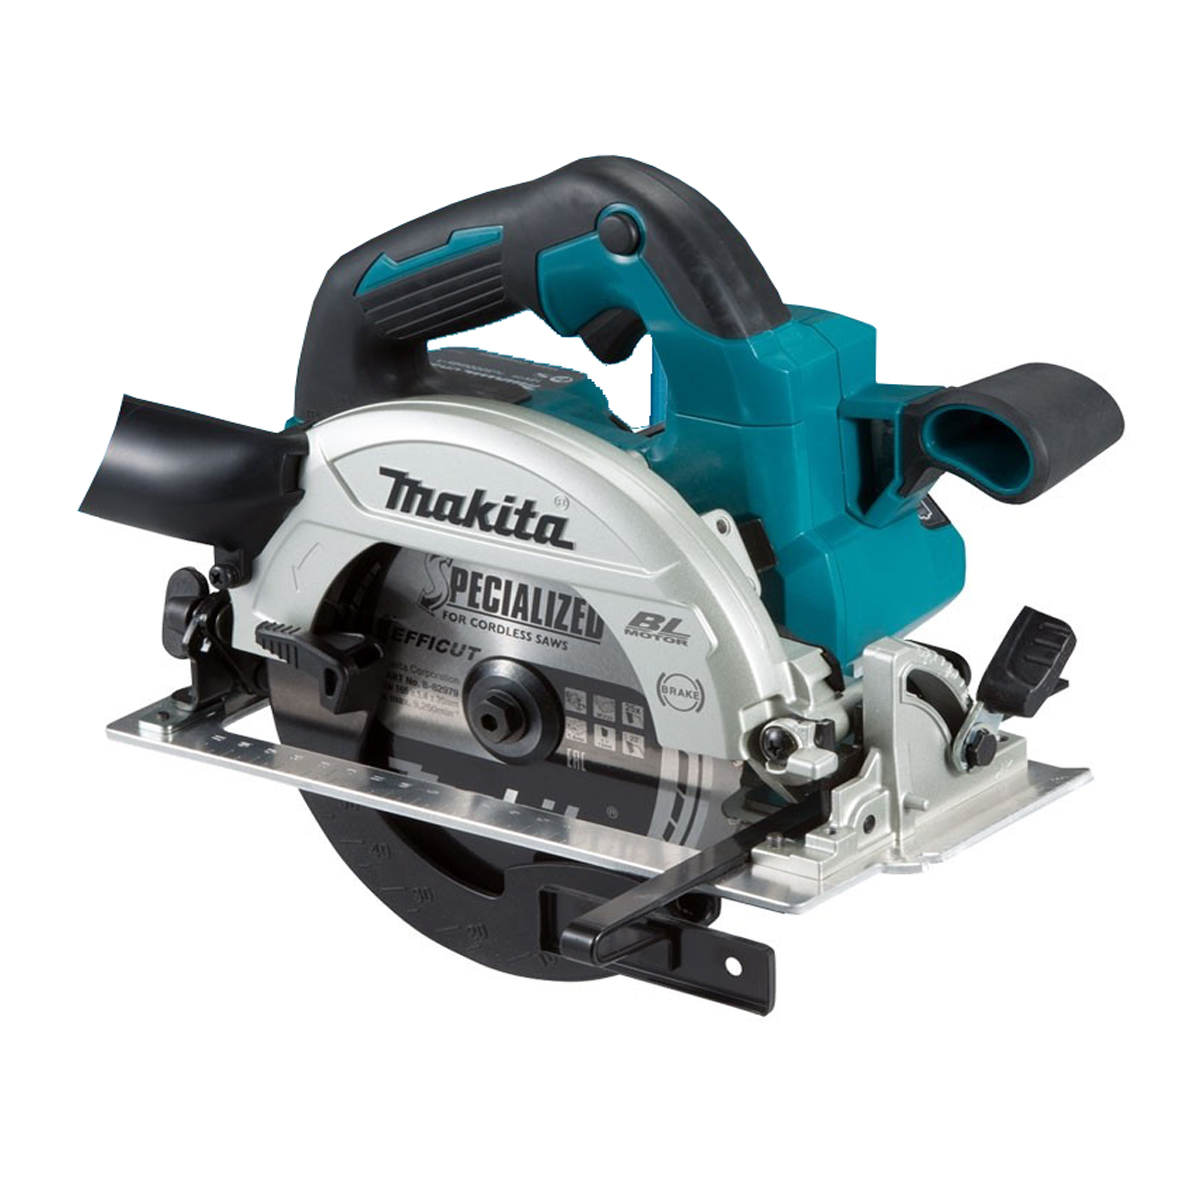 Makita DHS660 18V Brushless 165mm Circular Saw LXT - Body Only